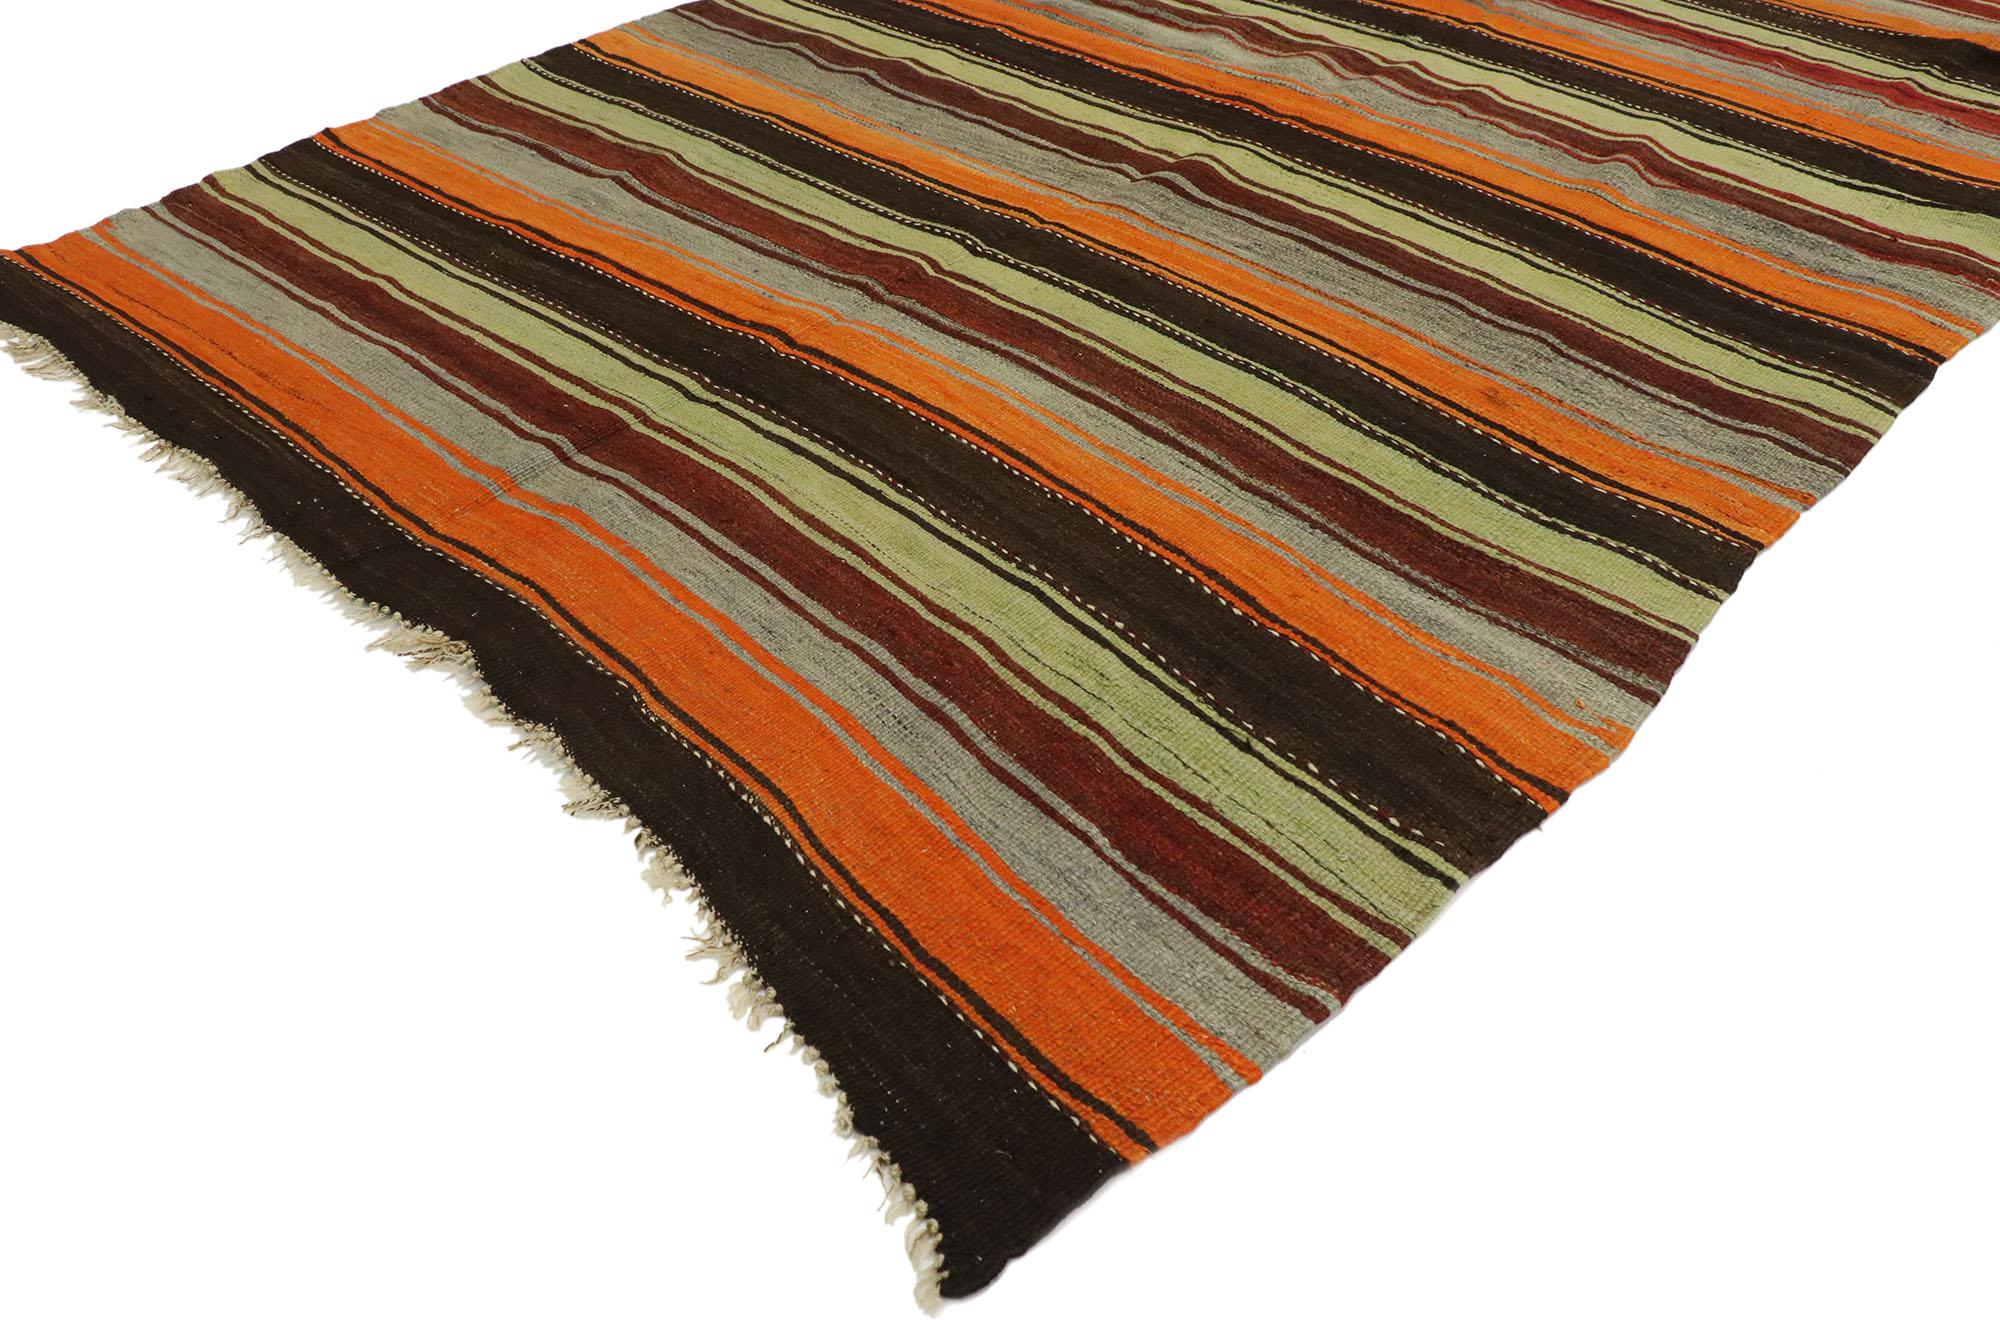 53123, vintage Turkish Striped Kilim rug with Modern Cabin style. With its warm hues and rugged beauty, this handwoven wool striped Kilim rug manages to meld contemporary, modern, and Traditional Design elements. The flat-weave Kilim rug features a